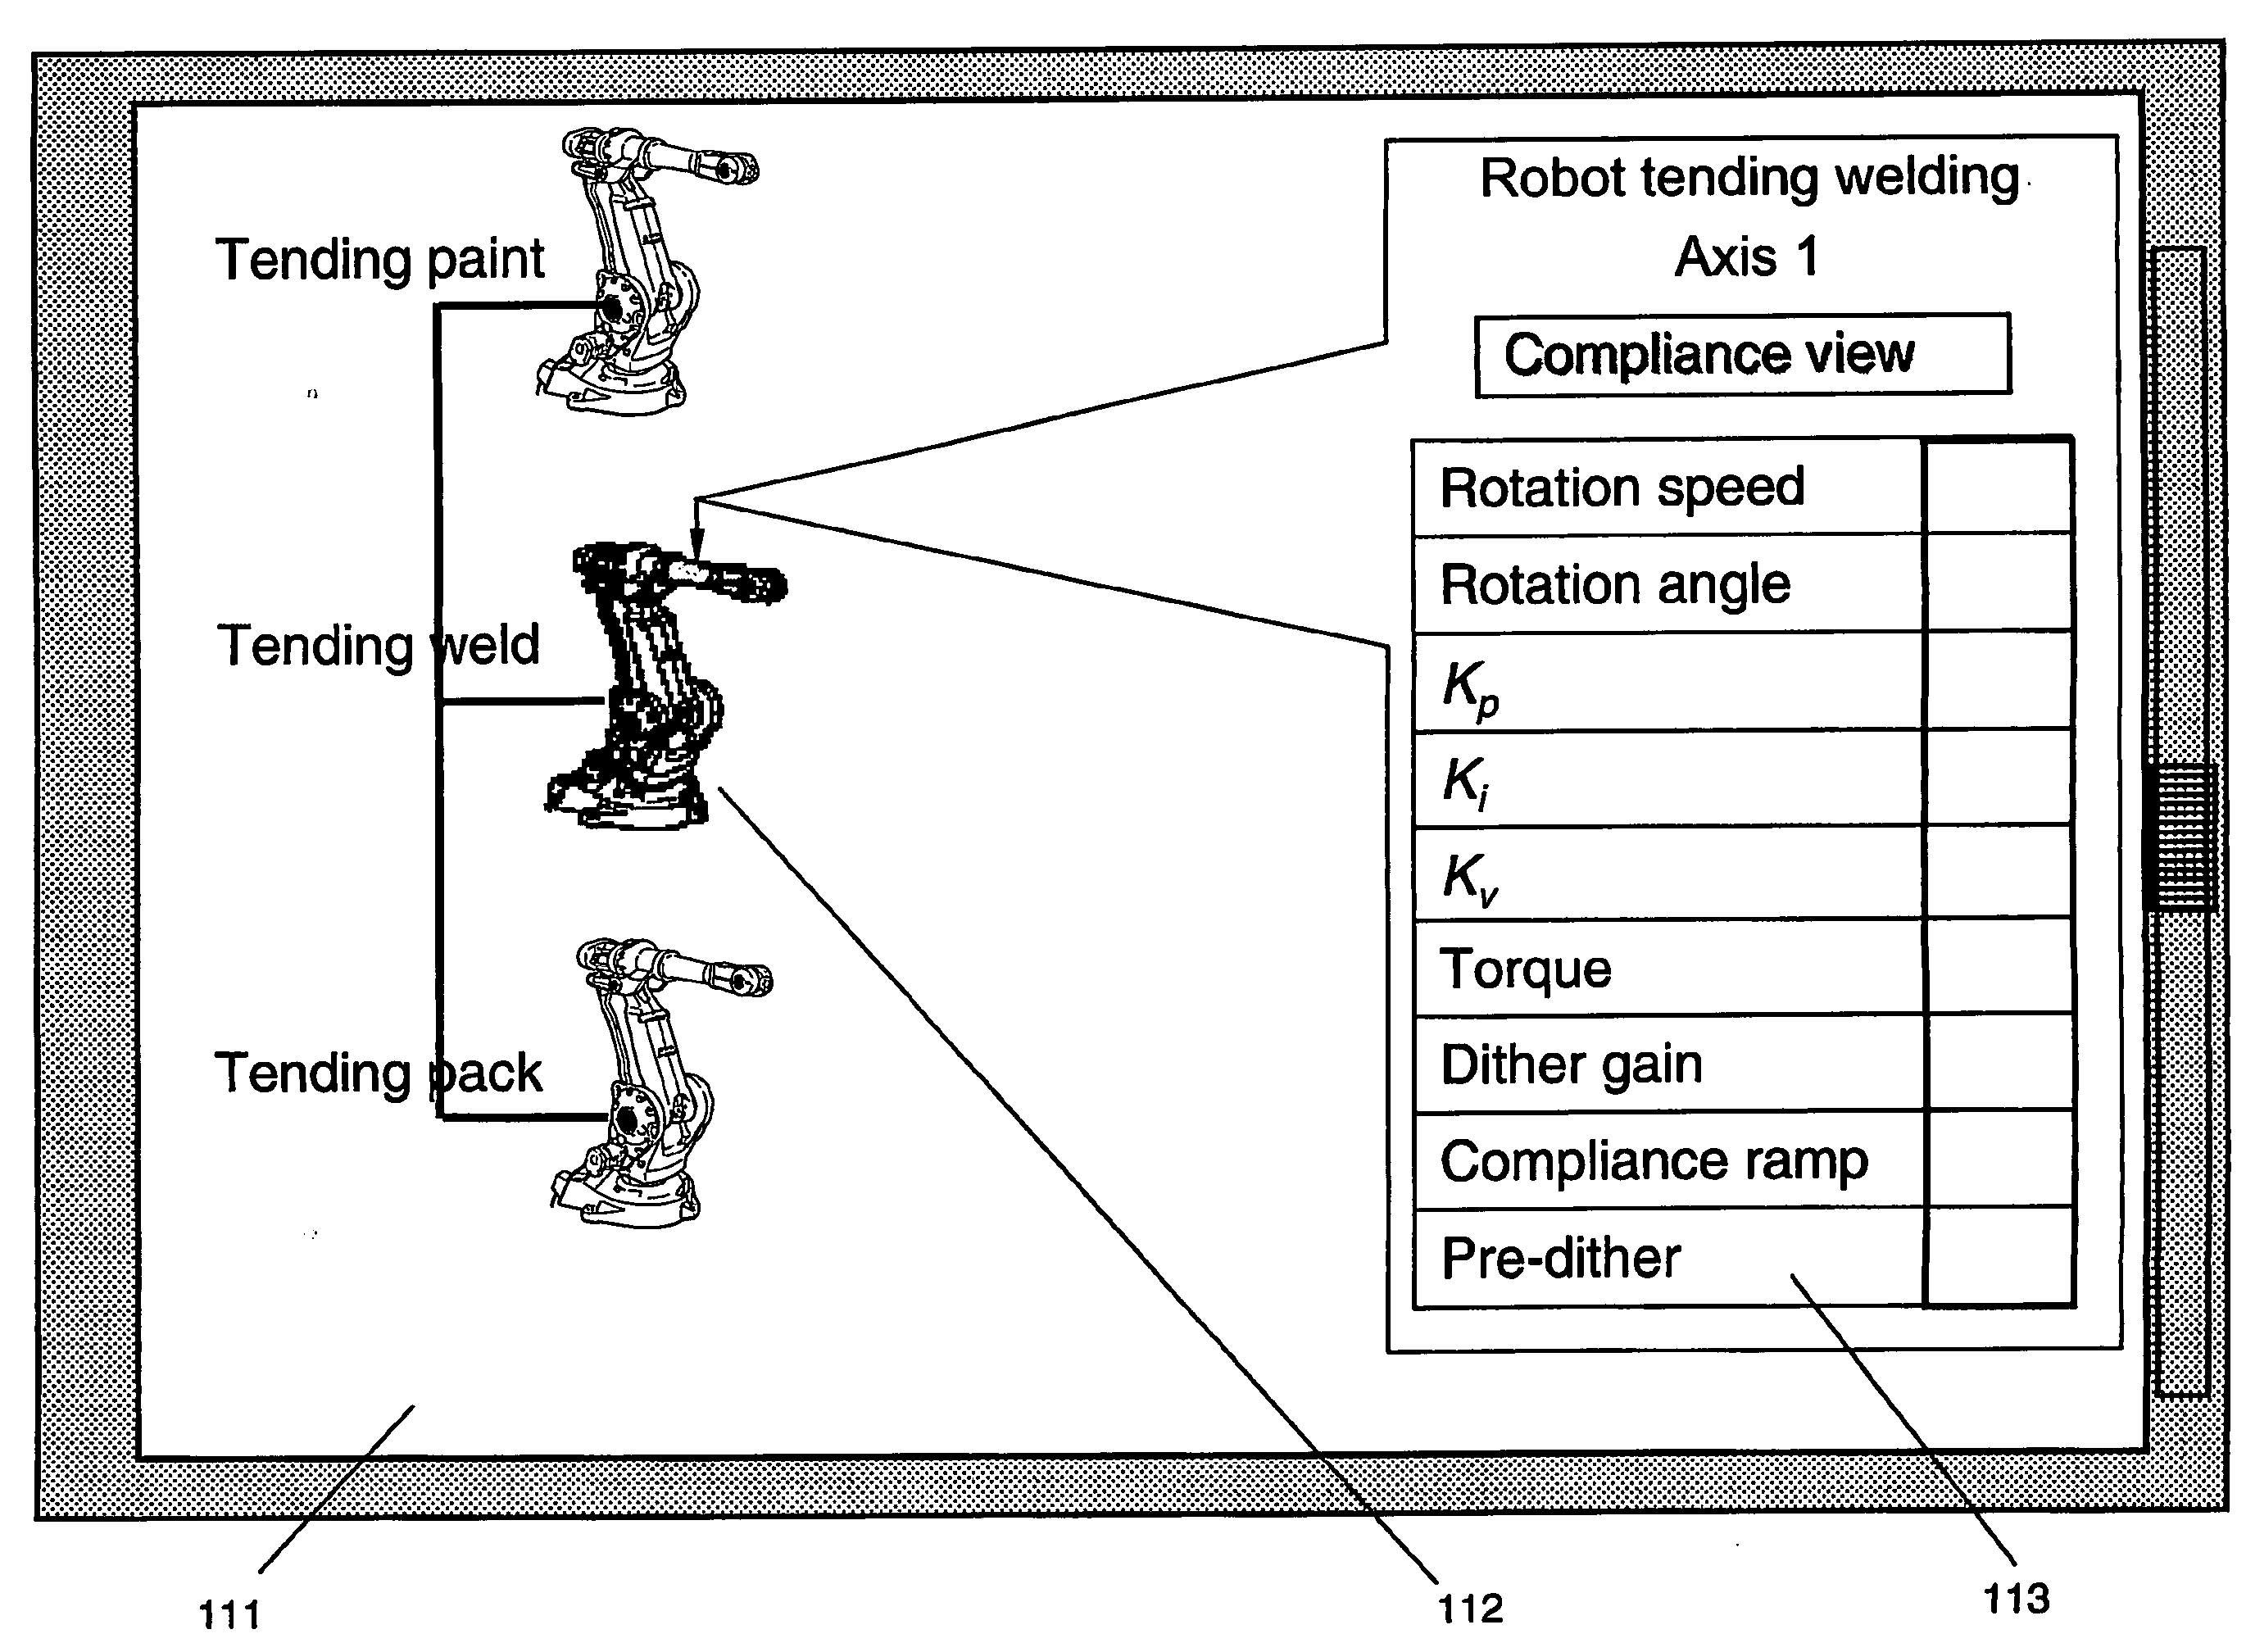 Control Method for a Robot